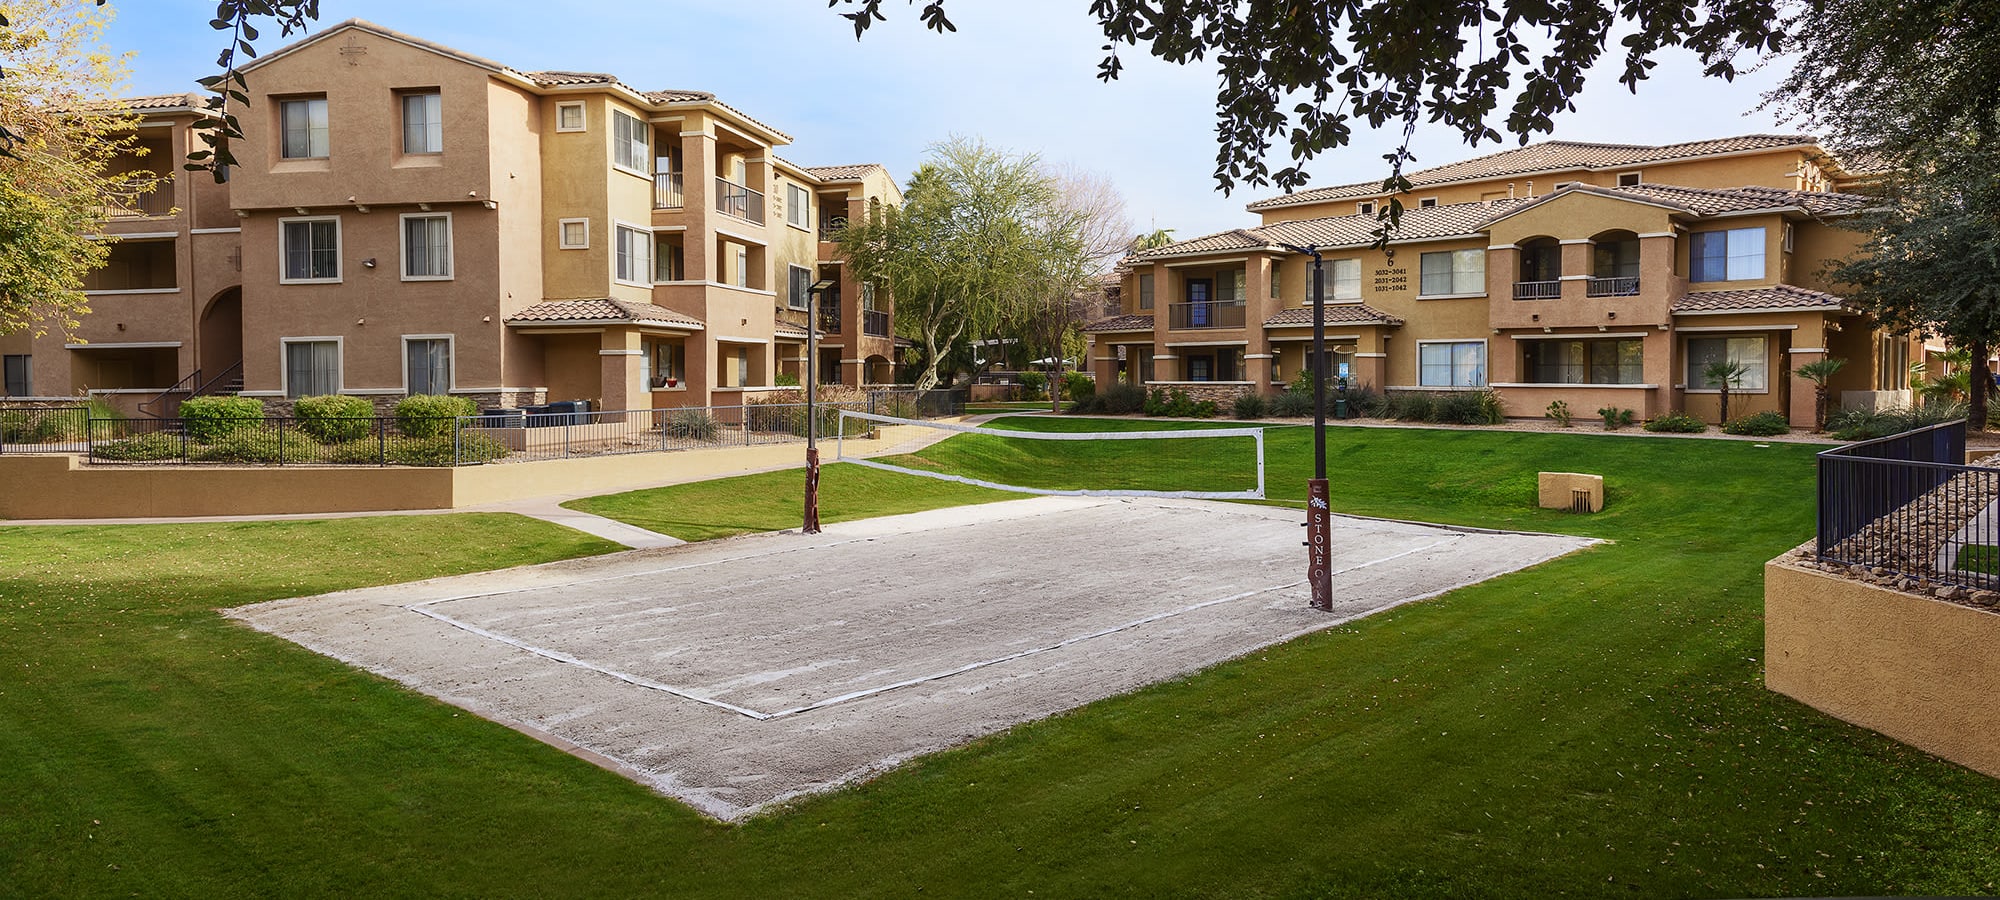 Volleyball court at Stone Oaks in Chandler, Arizona